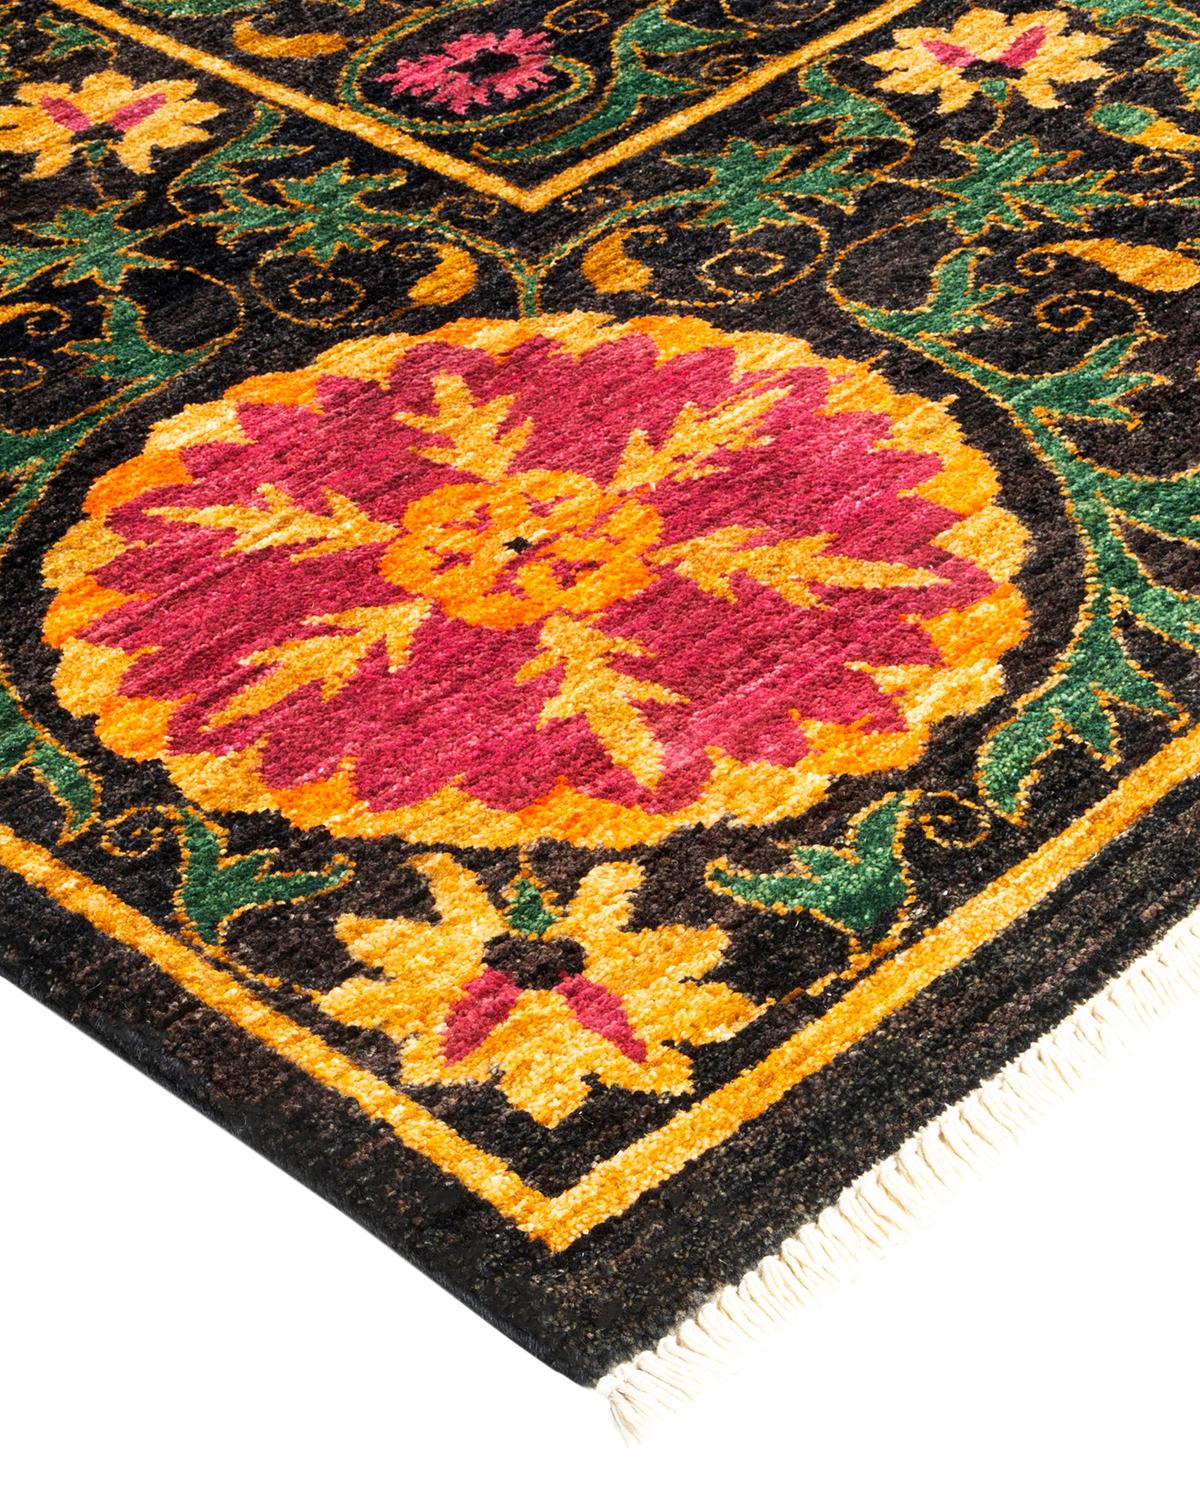 The meticulous art of hand-embroidered textiles from Uzbekistan tribes inspired the Suzani Collection of rugs. Bold motifs, particularly pomegranates, the sun, and the moon, are frequent elements, their simple yet compelling designs made even more